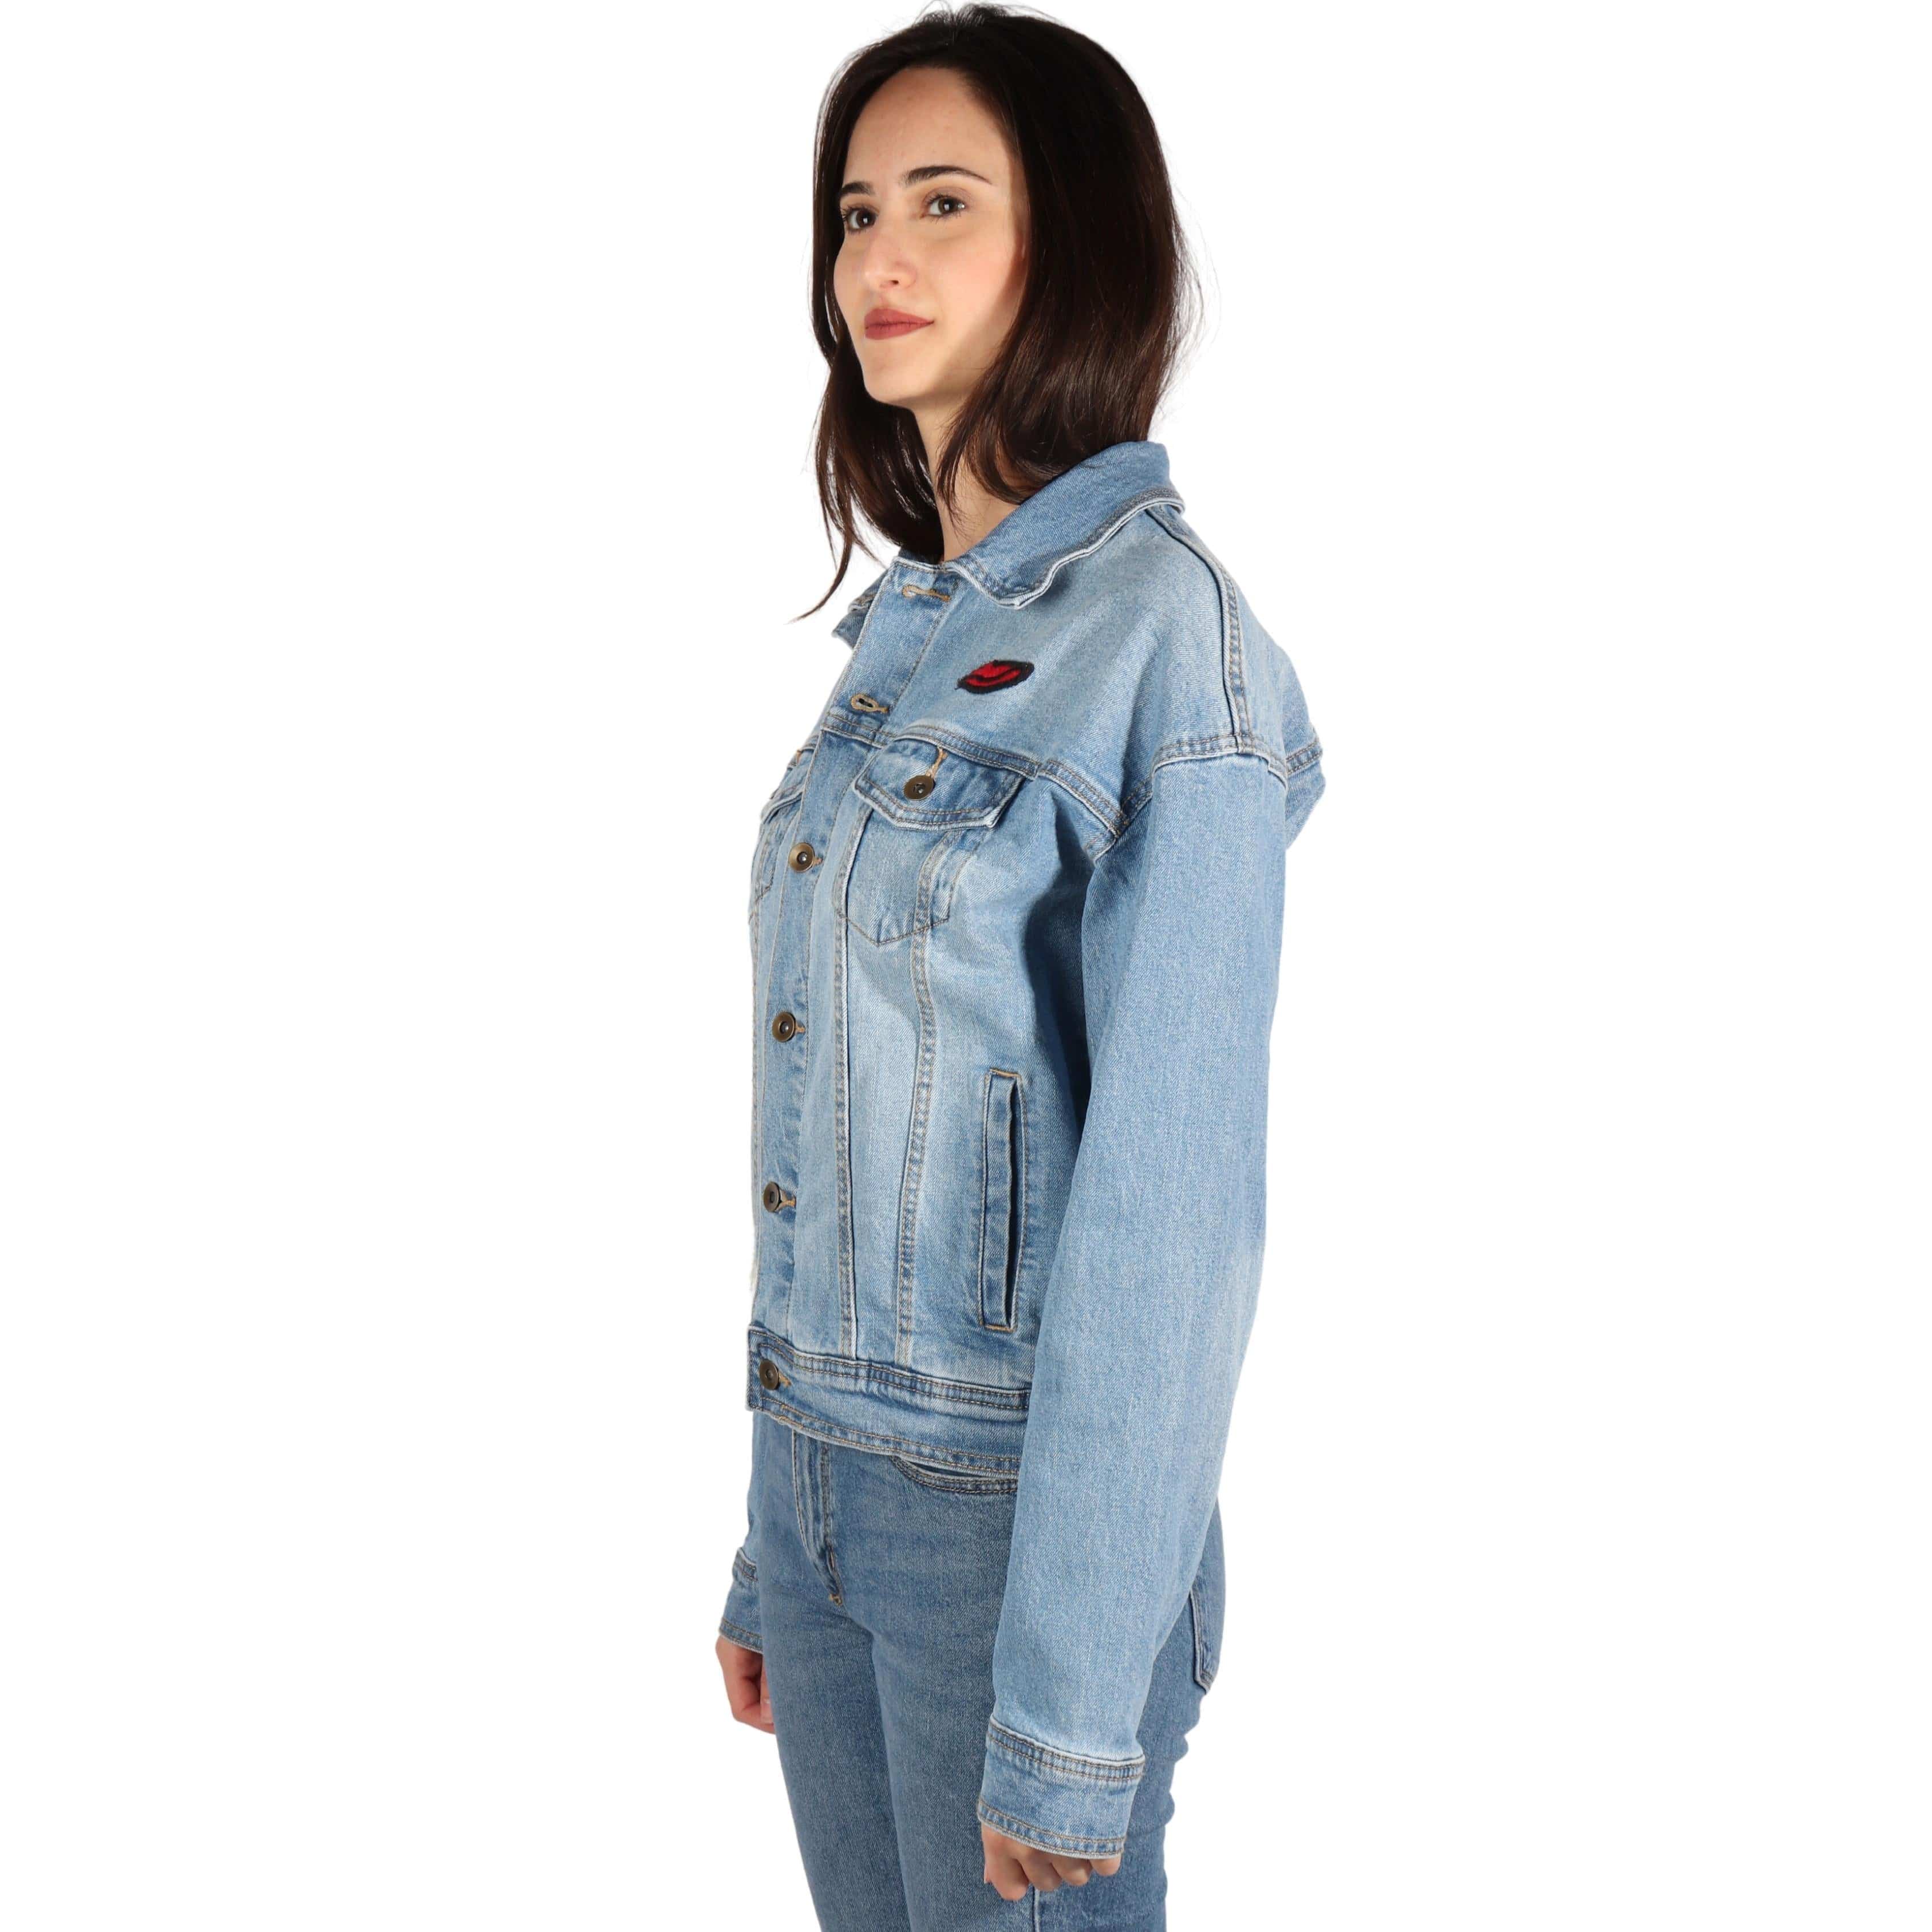 2017 New Brand Womens Oversized Denim Jacket With Floral Embroidery  Wholesale Uwback Windbreak Denim Coat TB1274 From Goodly3128, $31.15 |  DHgate.Com